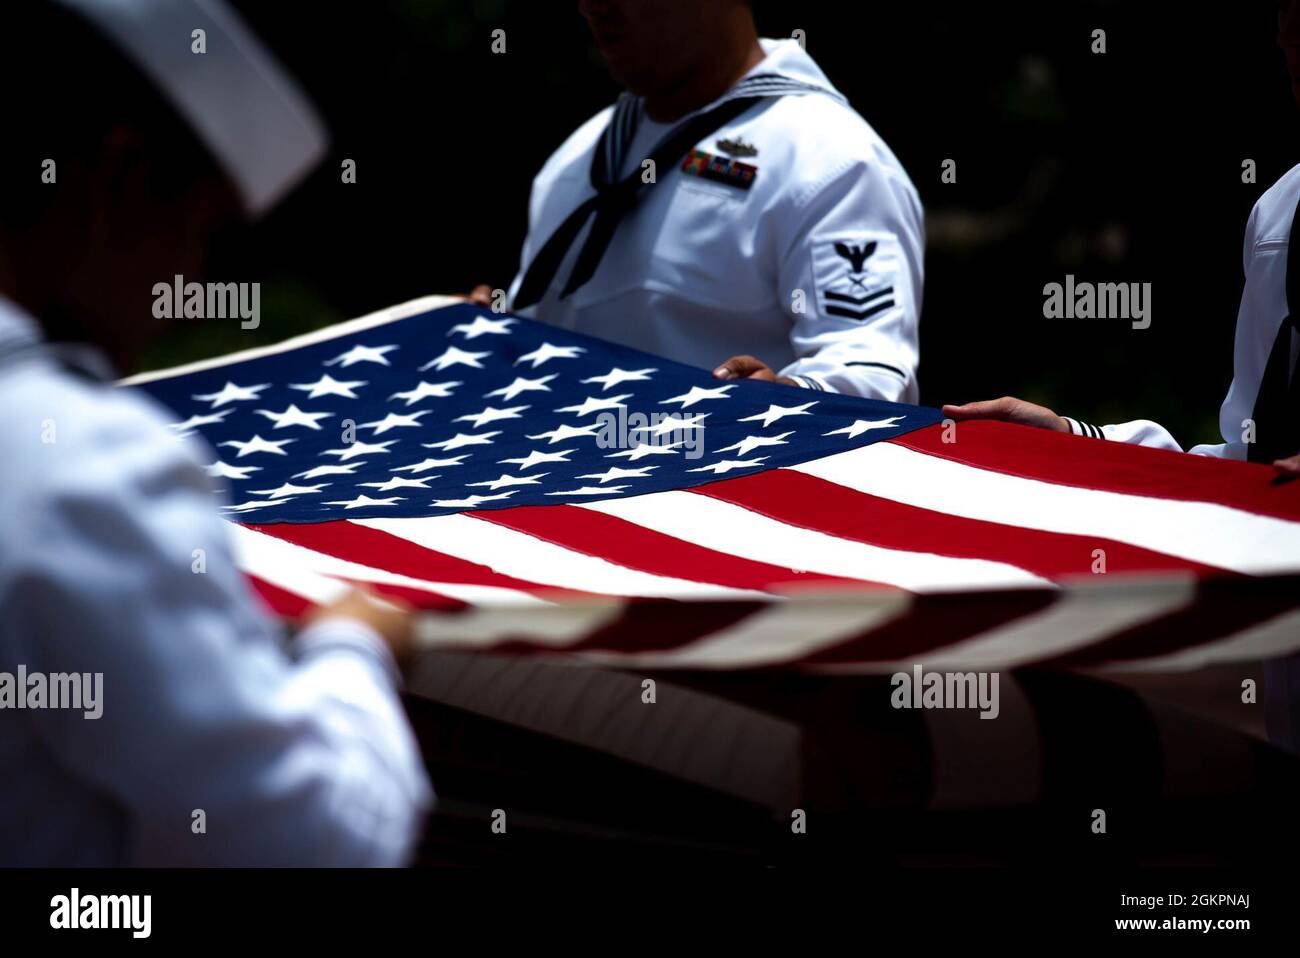 Members of the U.S. Navy Region Hawaii Honor Guard fold an American flag during a funeral for the Trapp brothers at the National Memorial Cemetery of the Pacific, Honolulu, Hawaii, June 15, 2021. The Trapp brothers were assigned to the USS Oklahoma, which sustained fire from Japanese aircraft and multiple torpedo hits causing the ship to capsize and resulted in the deaths of more than 400 crew members on Dec. 7, 1941, at Ford Island, Pearl Harbor. The Trapp brothers were recently identified through DNA analysis by the Defense POW/MIA Accounting Agency (DPAA) forensic laboratory and laid to res Stock Photo